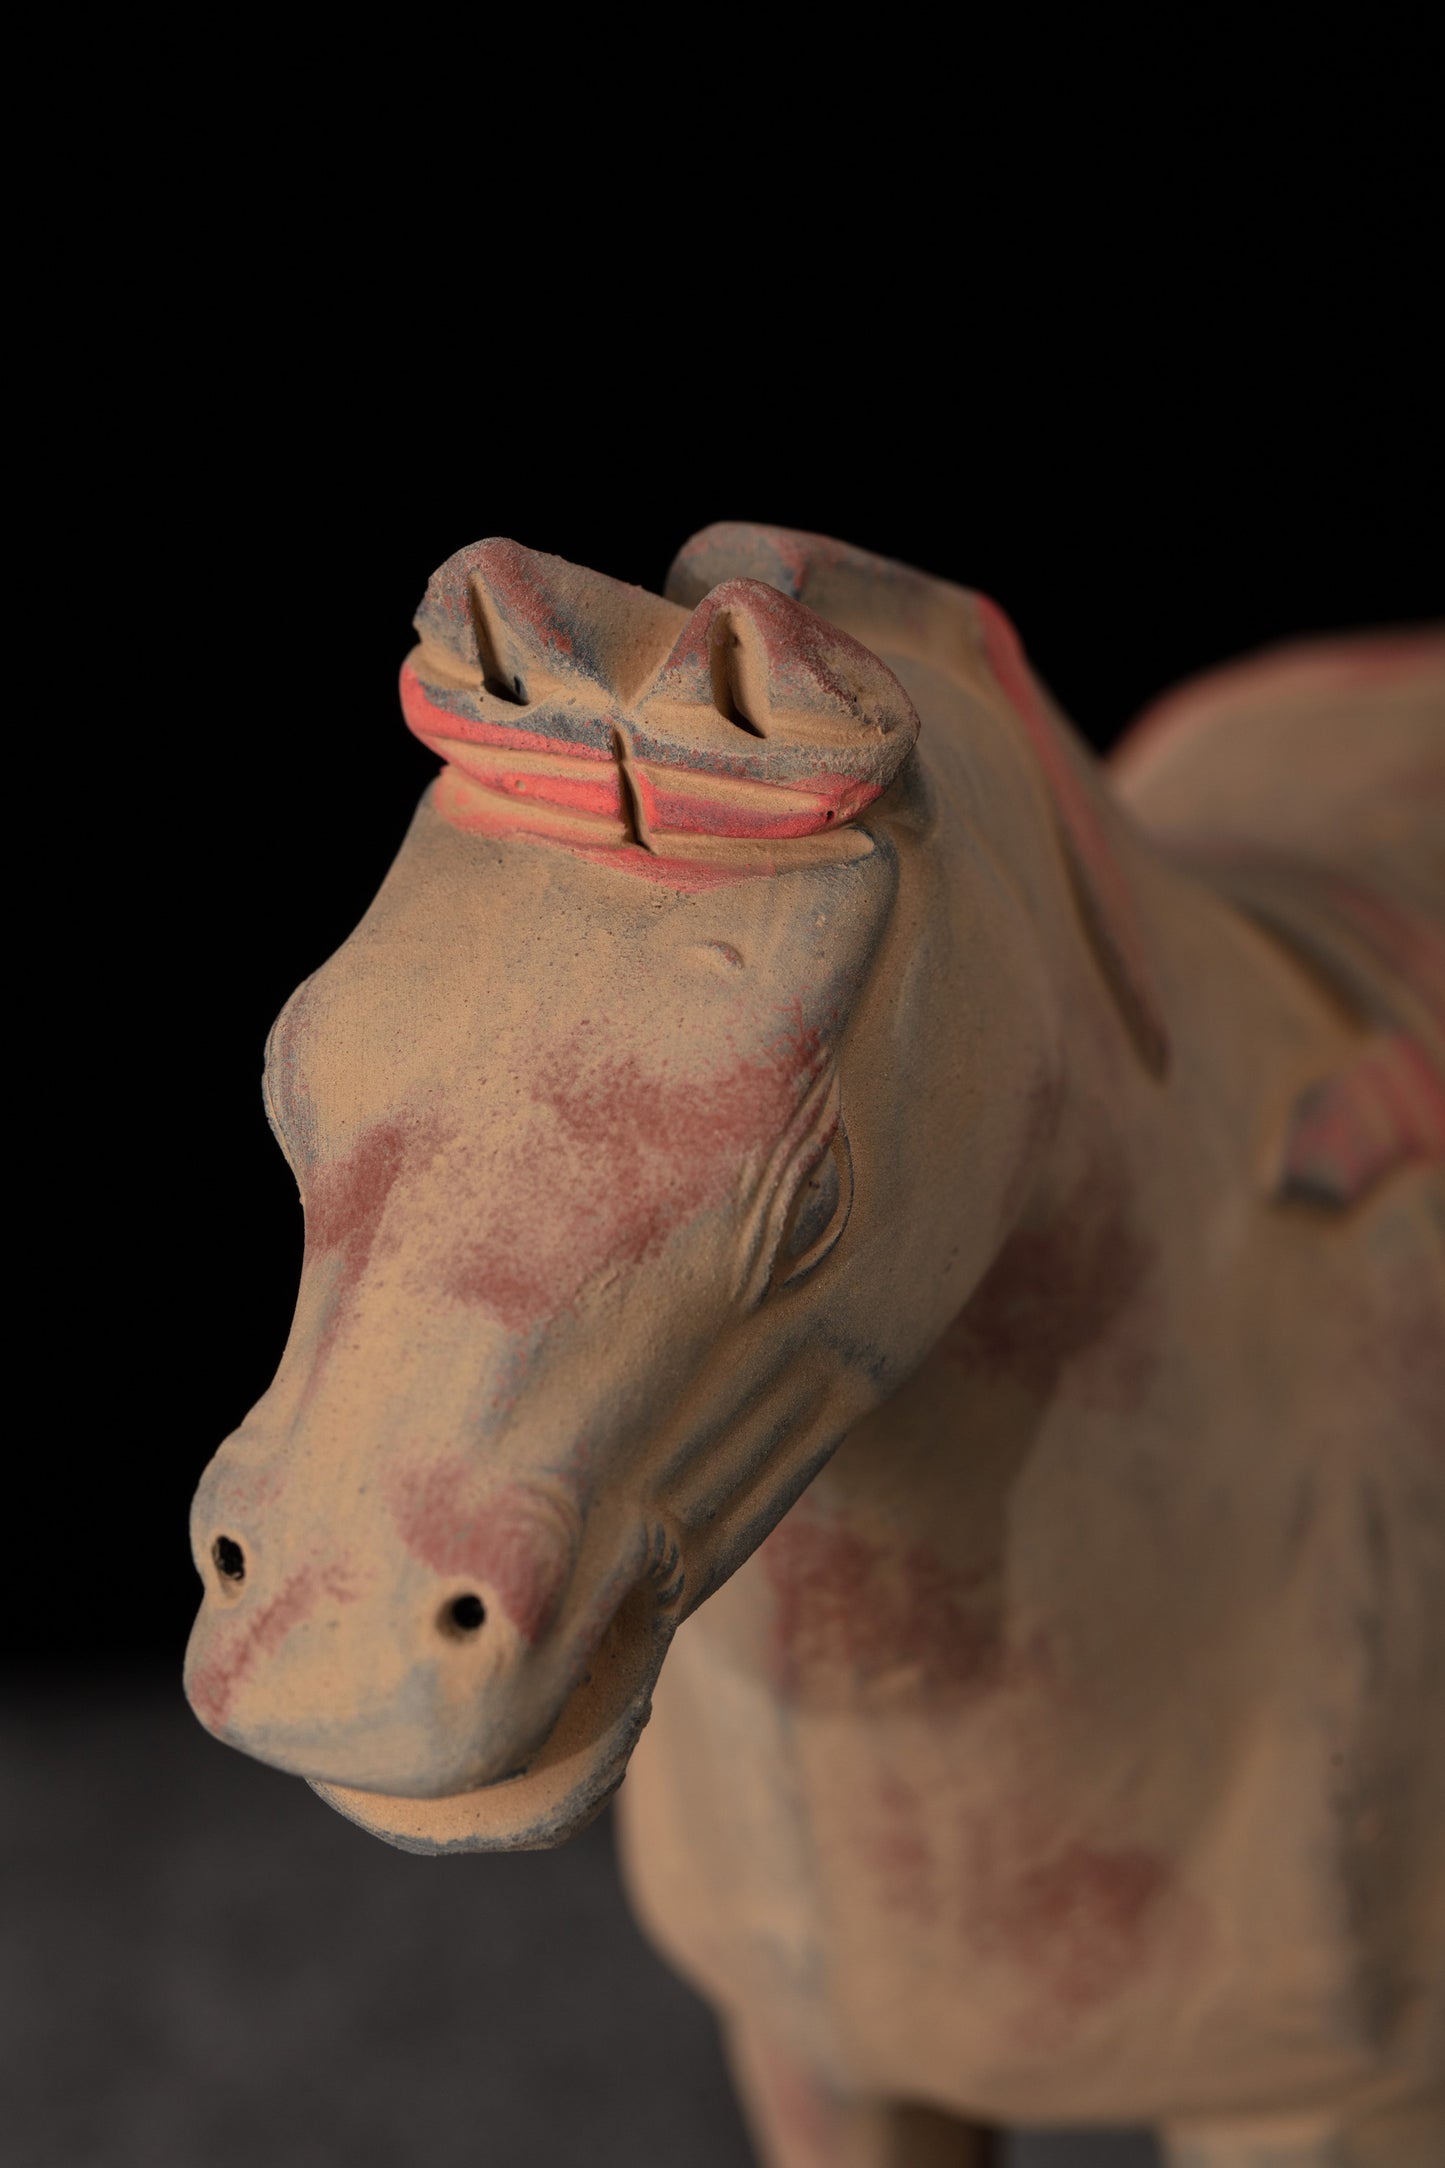 20CM Painted Horse - CLAYARMY -Dynamic angle capturing the vivid colors and lifelike expression of our 20CM Clayarmy Terracotta Painted Horse.